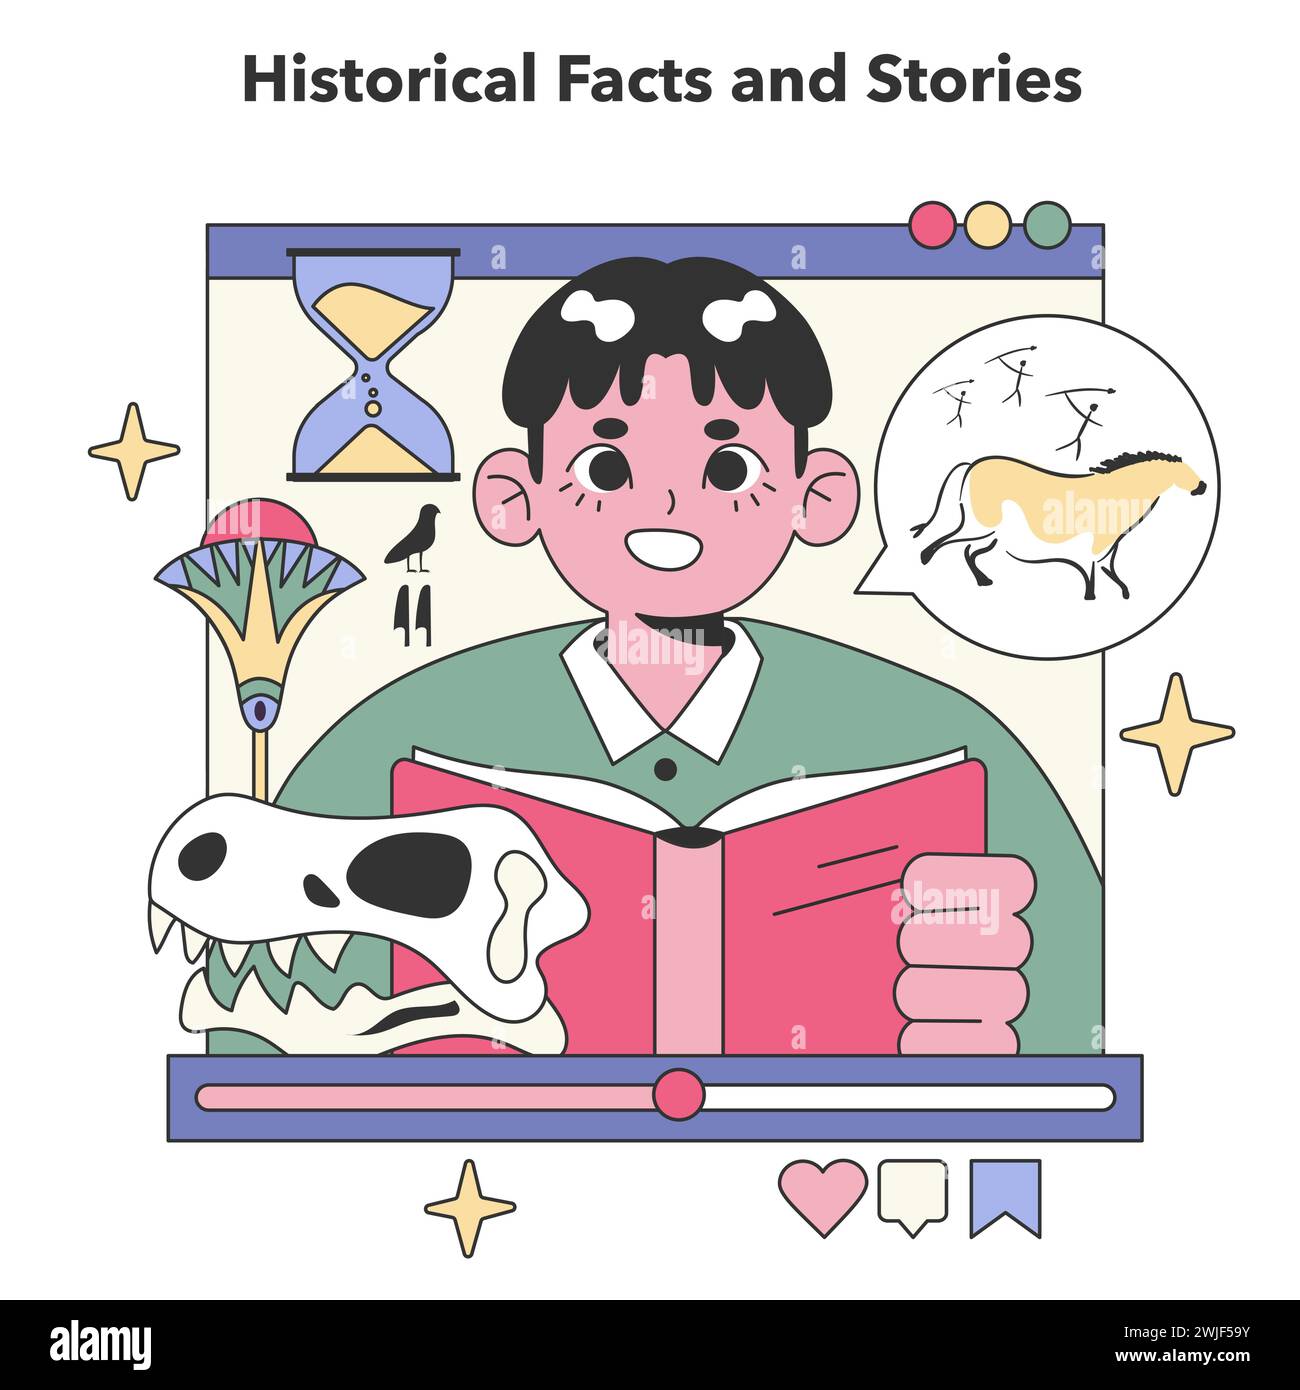 Historical Facts and Stories concept. Discovering the past through engaging visuals of artifacts and timelines. Educational journey in history. Flat vector illustration. Stock Vector